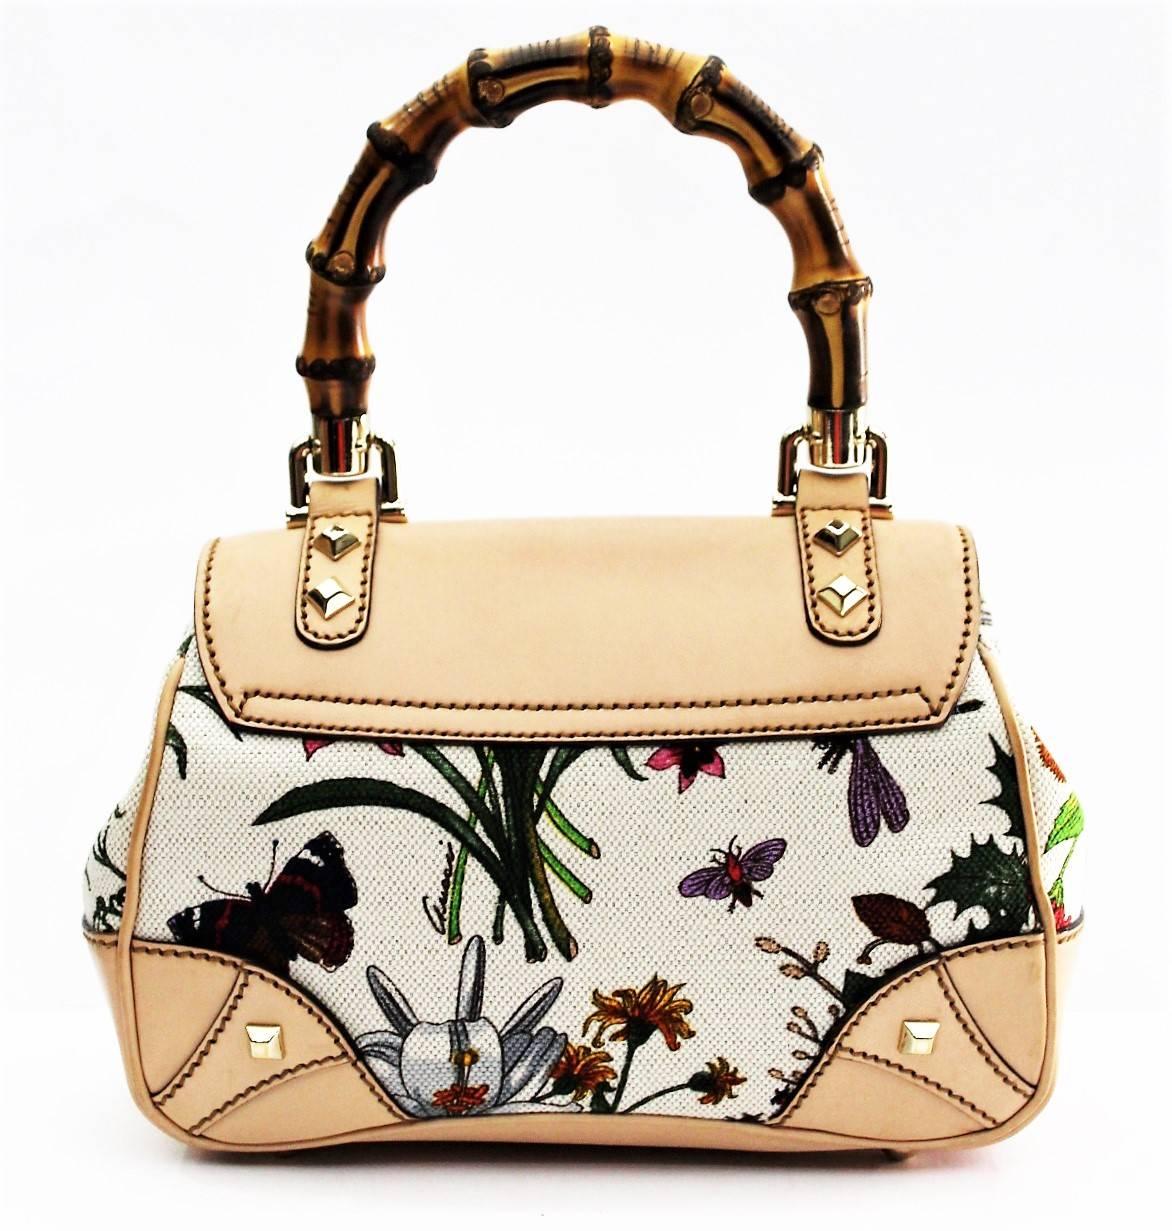 This chic tote is crafted of bright floral print canvas. The bag features a looping bamboo top handle and leather treatment in a light tone with base corners and a half frontal flap with a bamboo turn lock and brass hardware. This opens to a